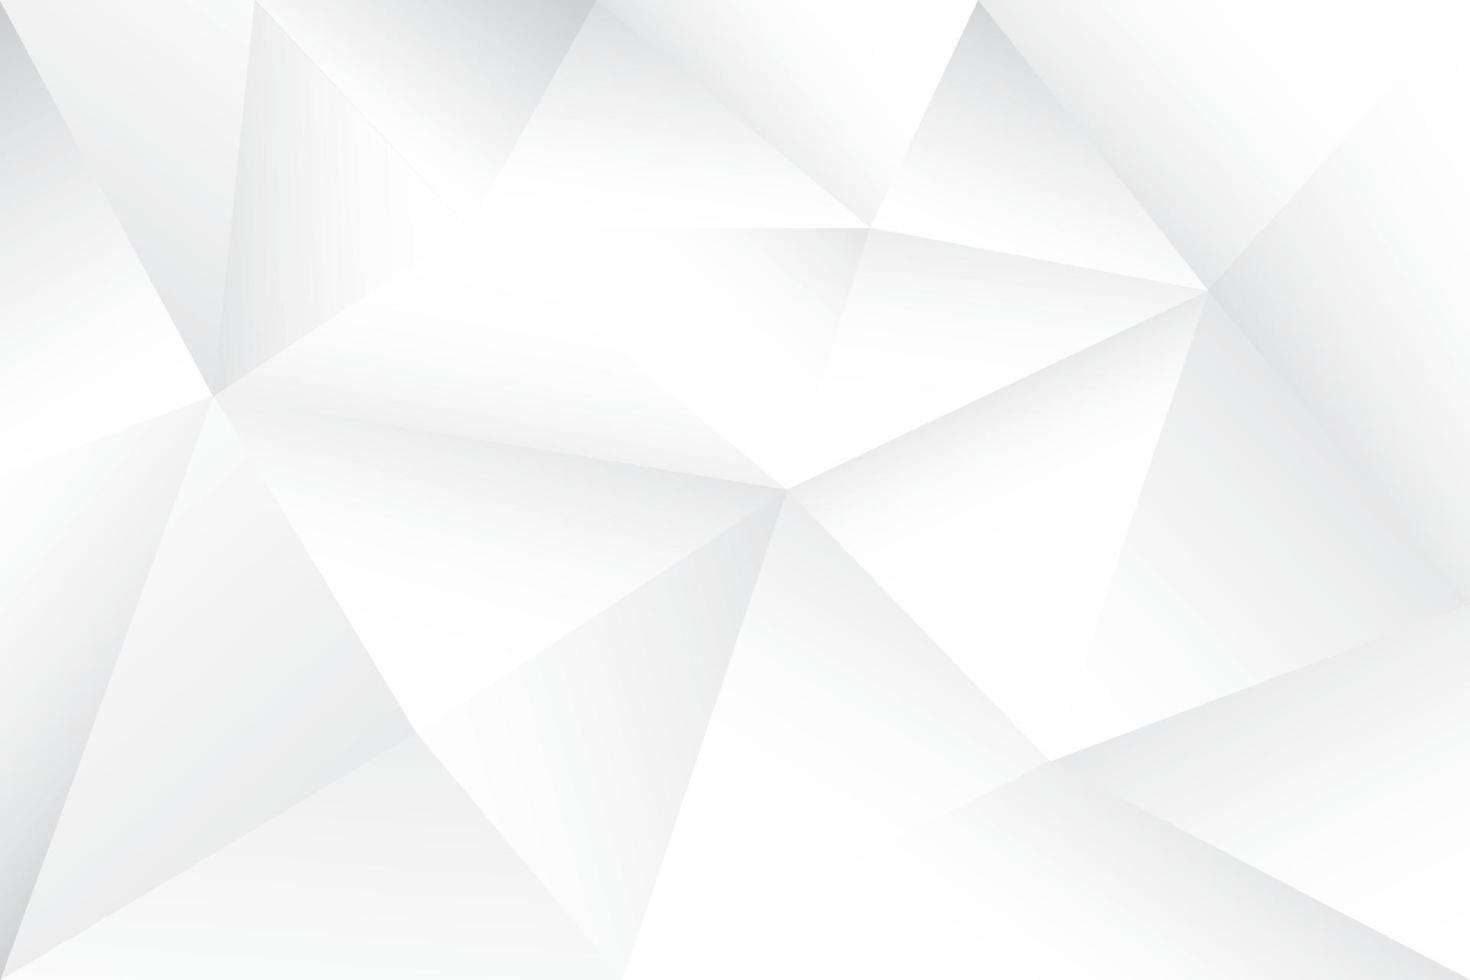 Abstract gray and white polygon background. Vector illustration.